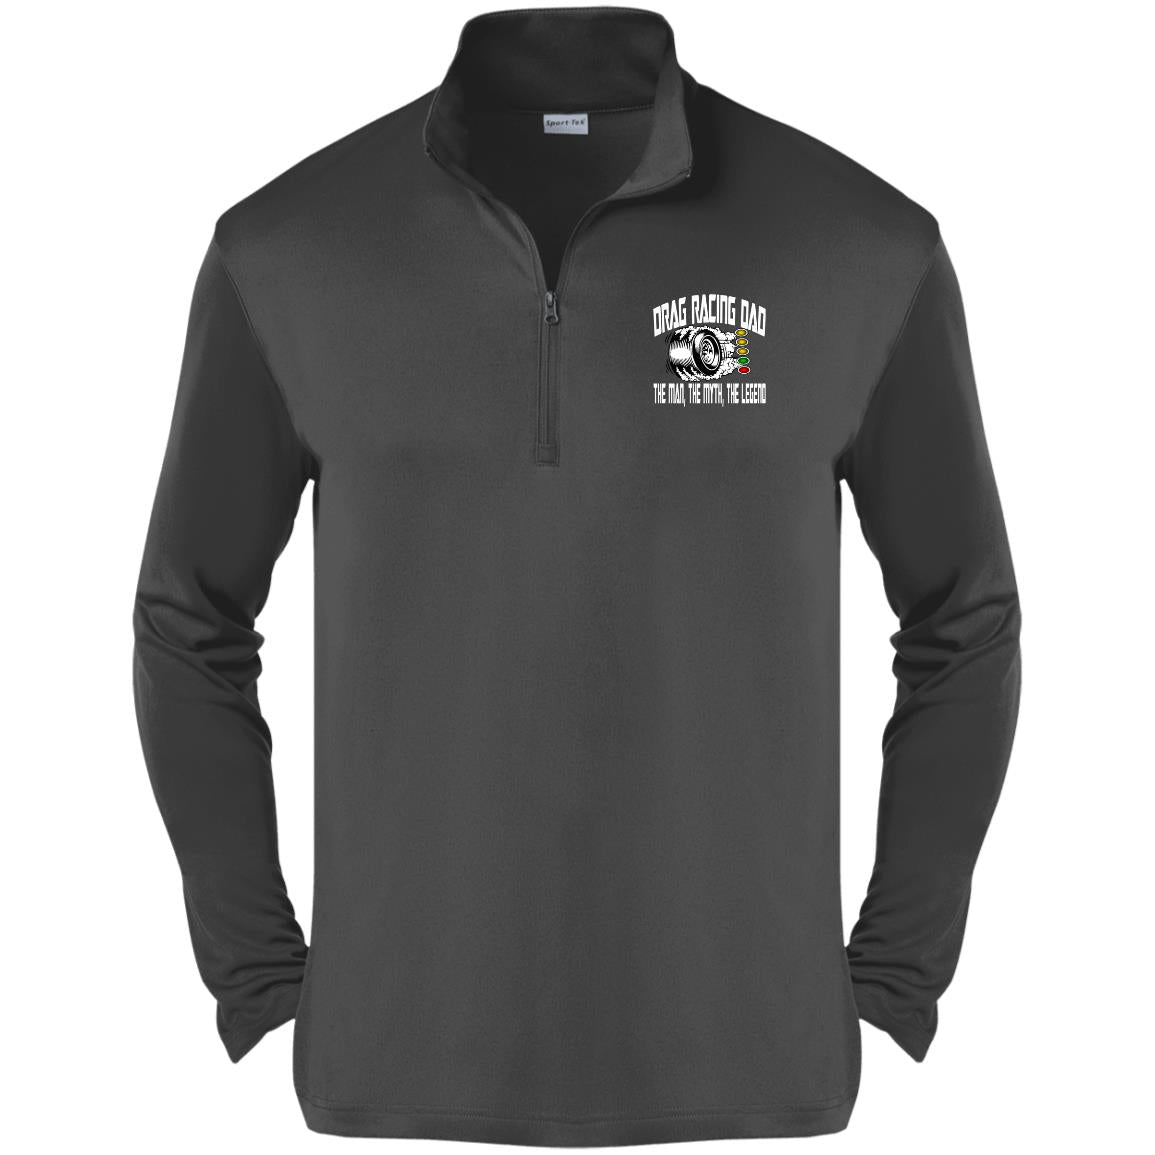 Drag Racing Dad Competitor 1/4-Zip Pullover